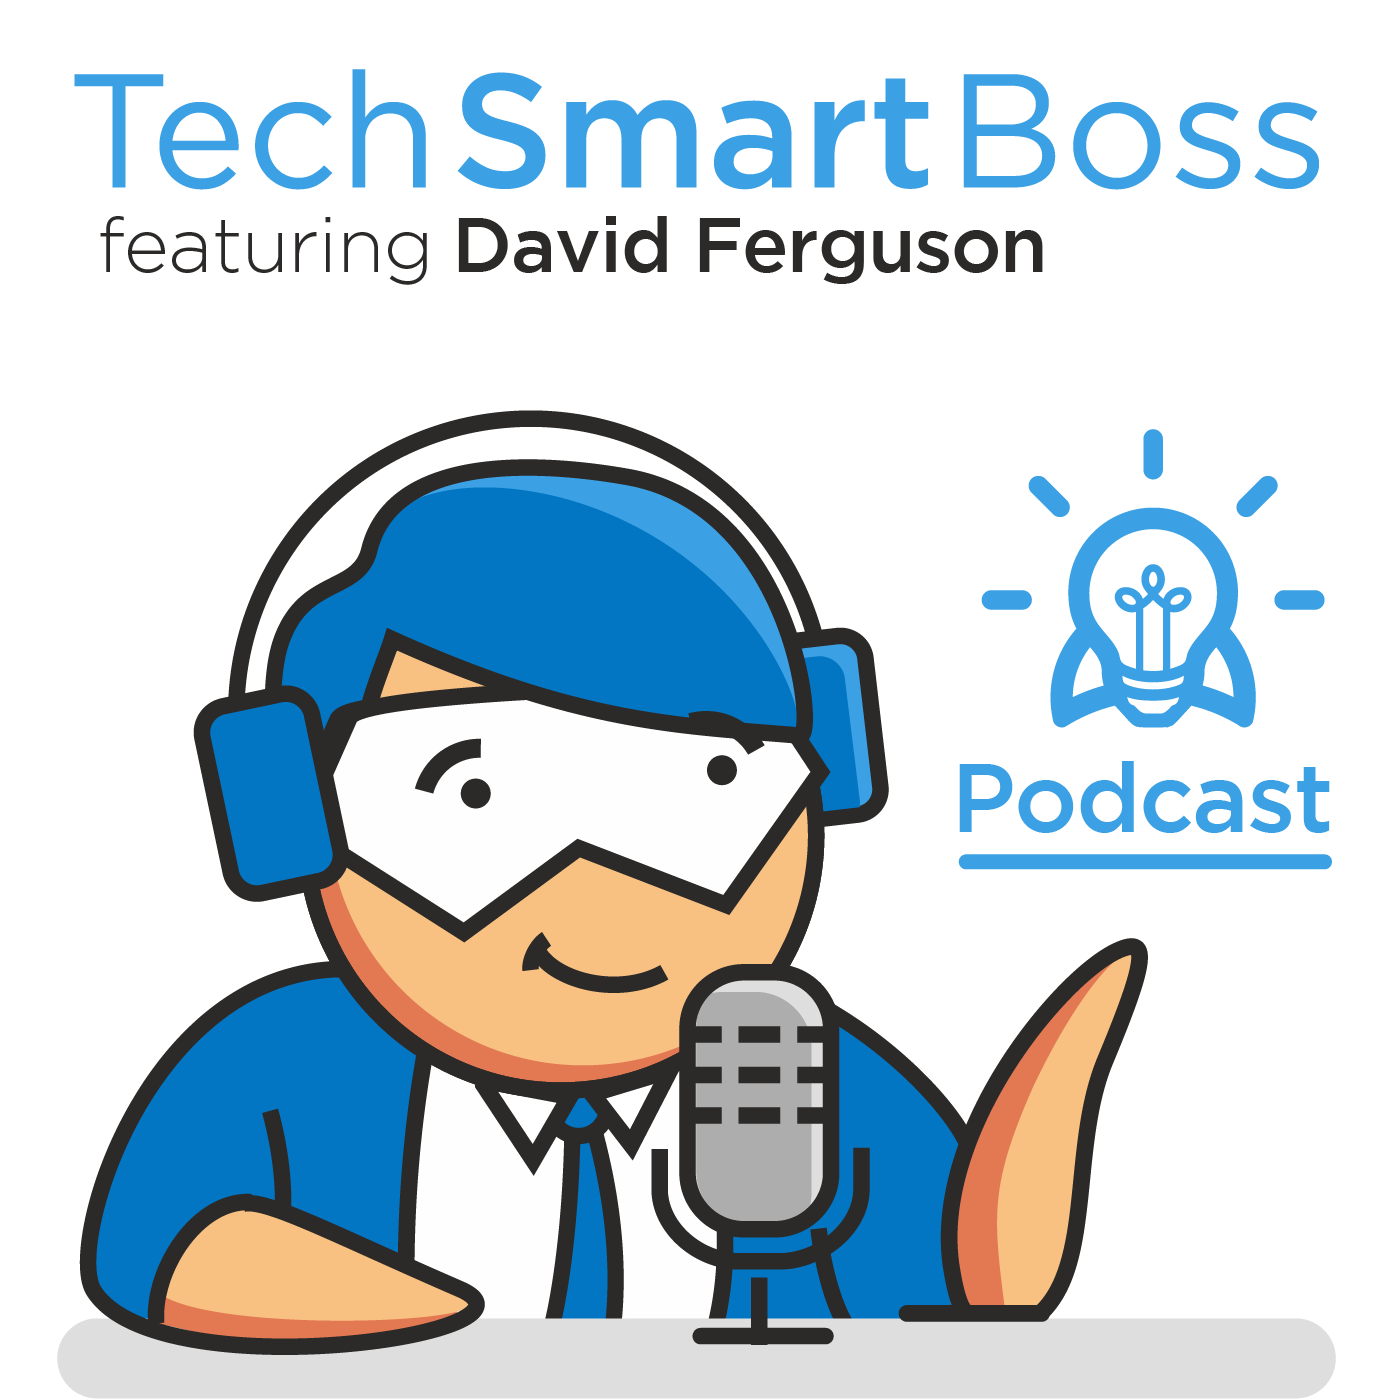 Episode 52: What I’ve Learned After One Year Of Tech Smart Boss (And How I’m Applying It To My Biz)